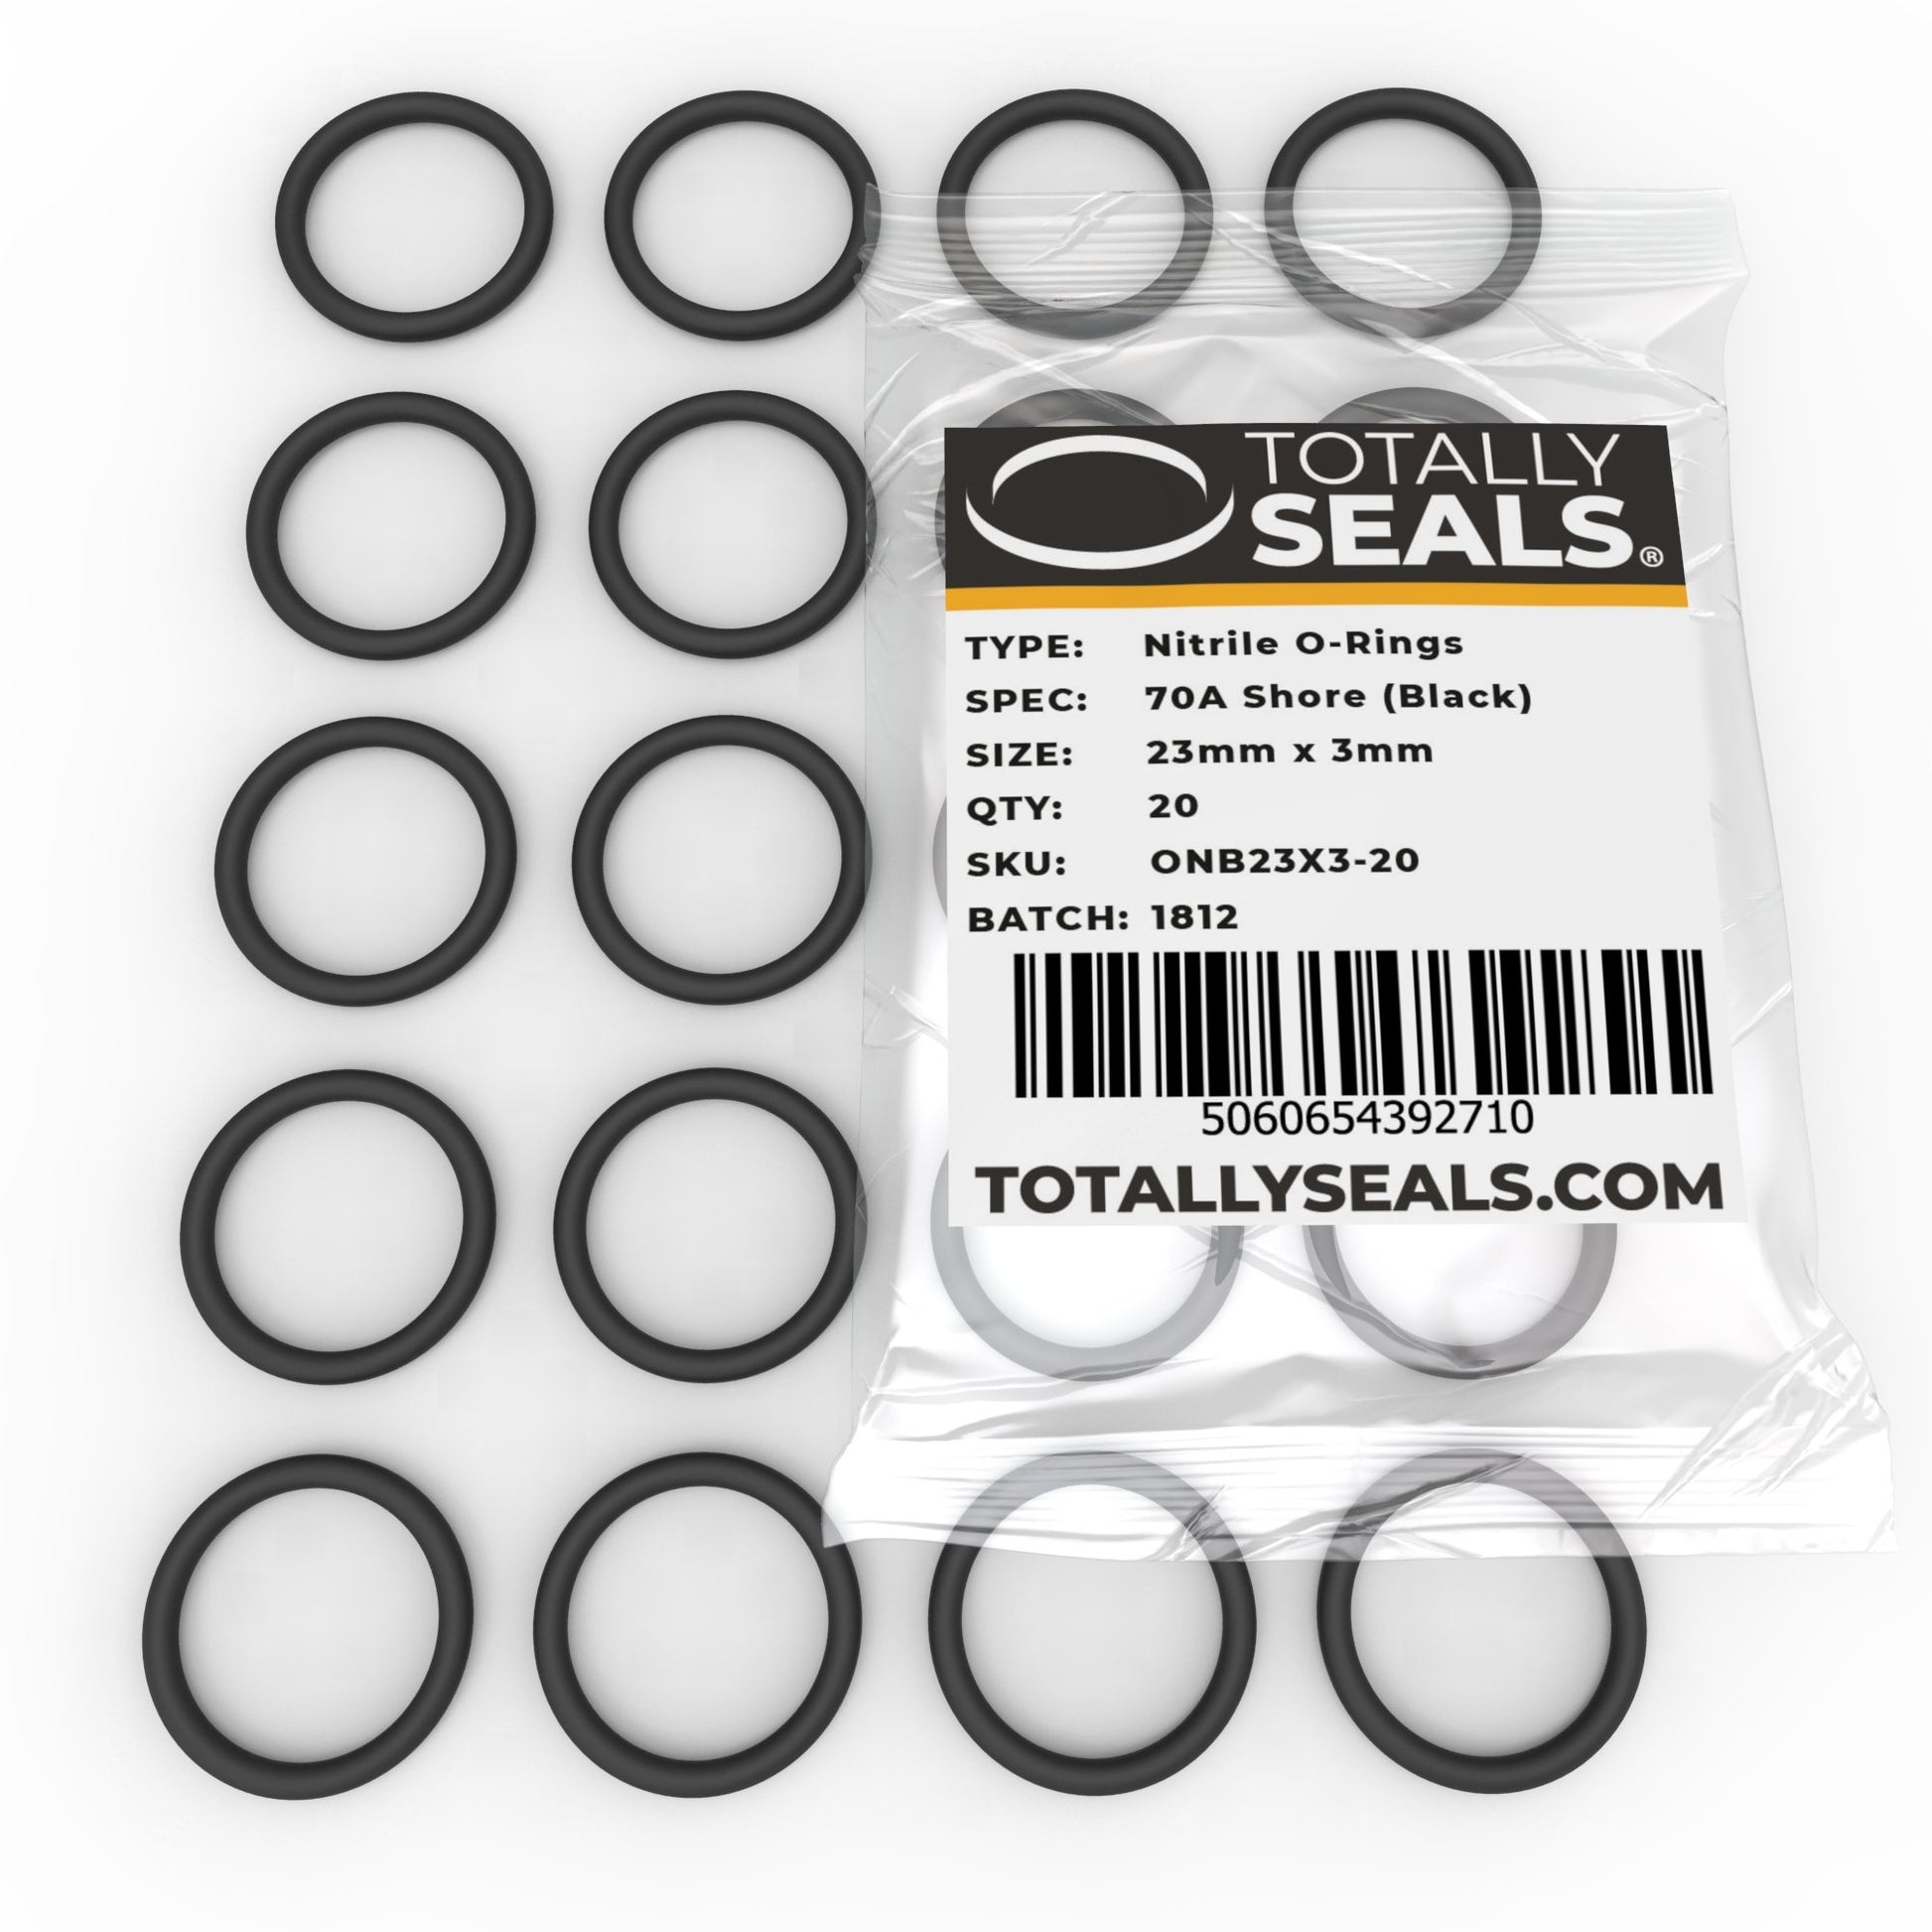 23mm x 3mm (29mm OD) Nitrile O-Rings - Totally Seals®